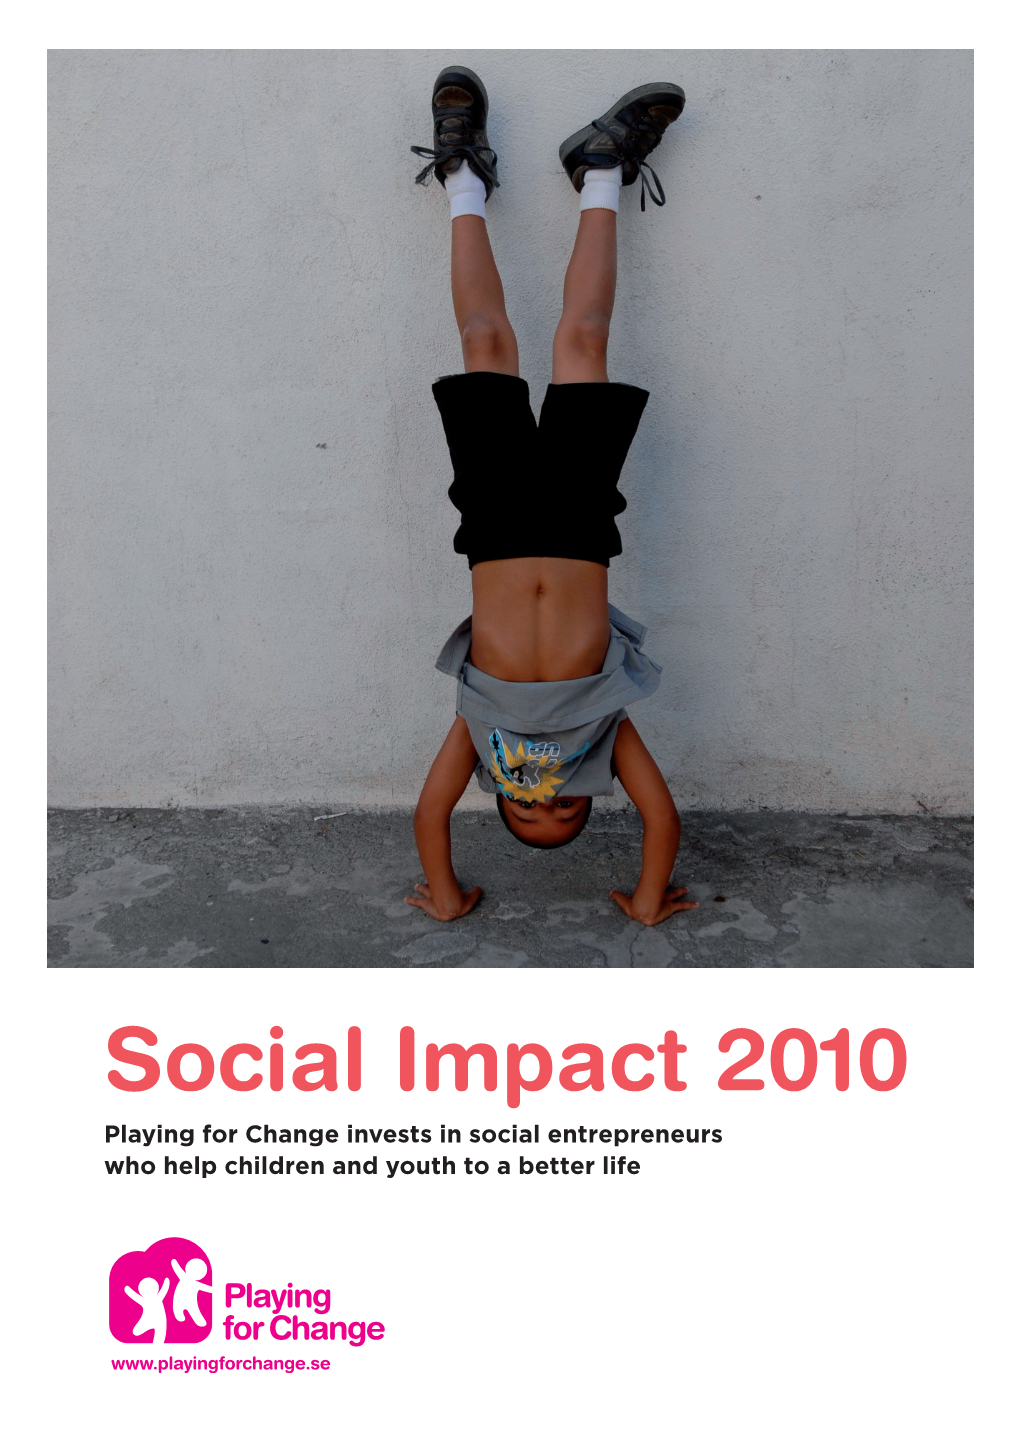 Social Impact 2010 Playing for Change Invests in Social Entrepreneurs Who Help Children and Youth to a Better Life 2010: the FIRST YEAR